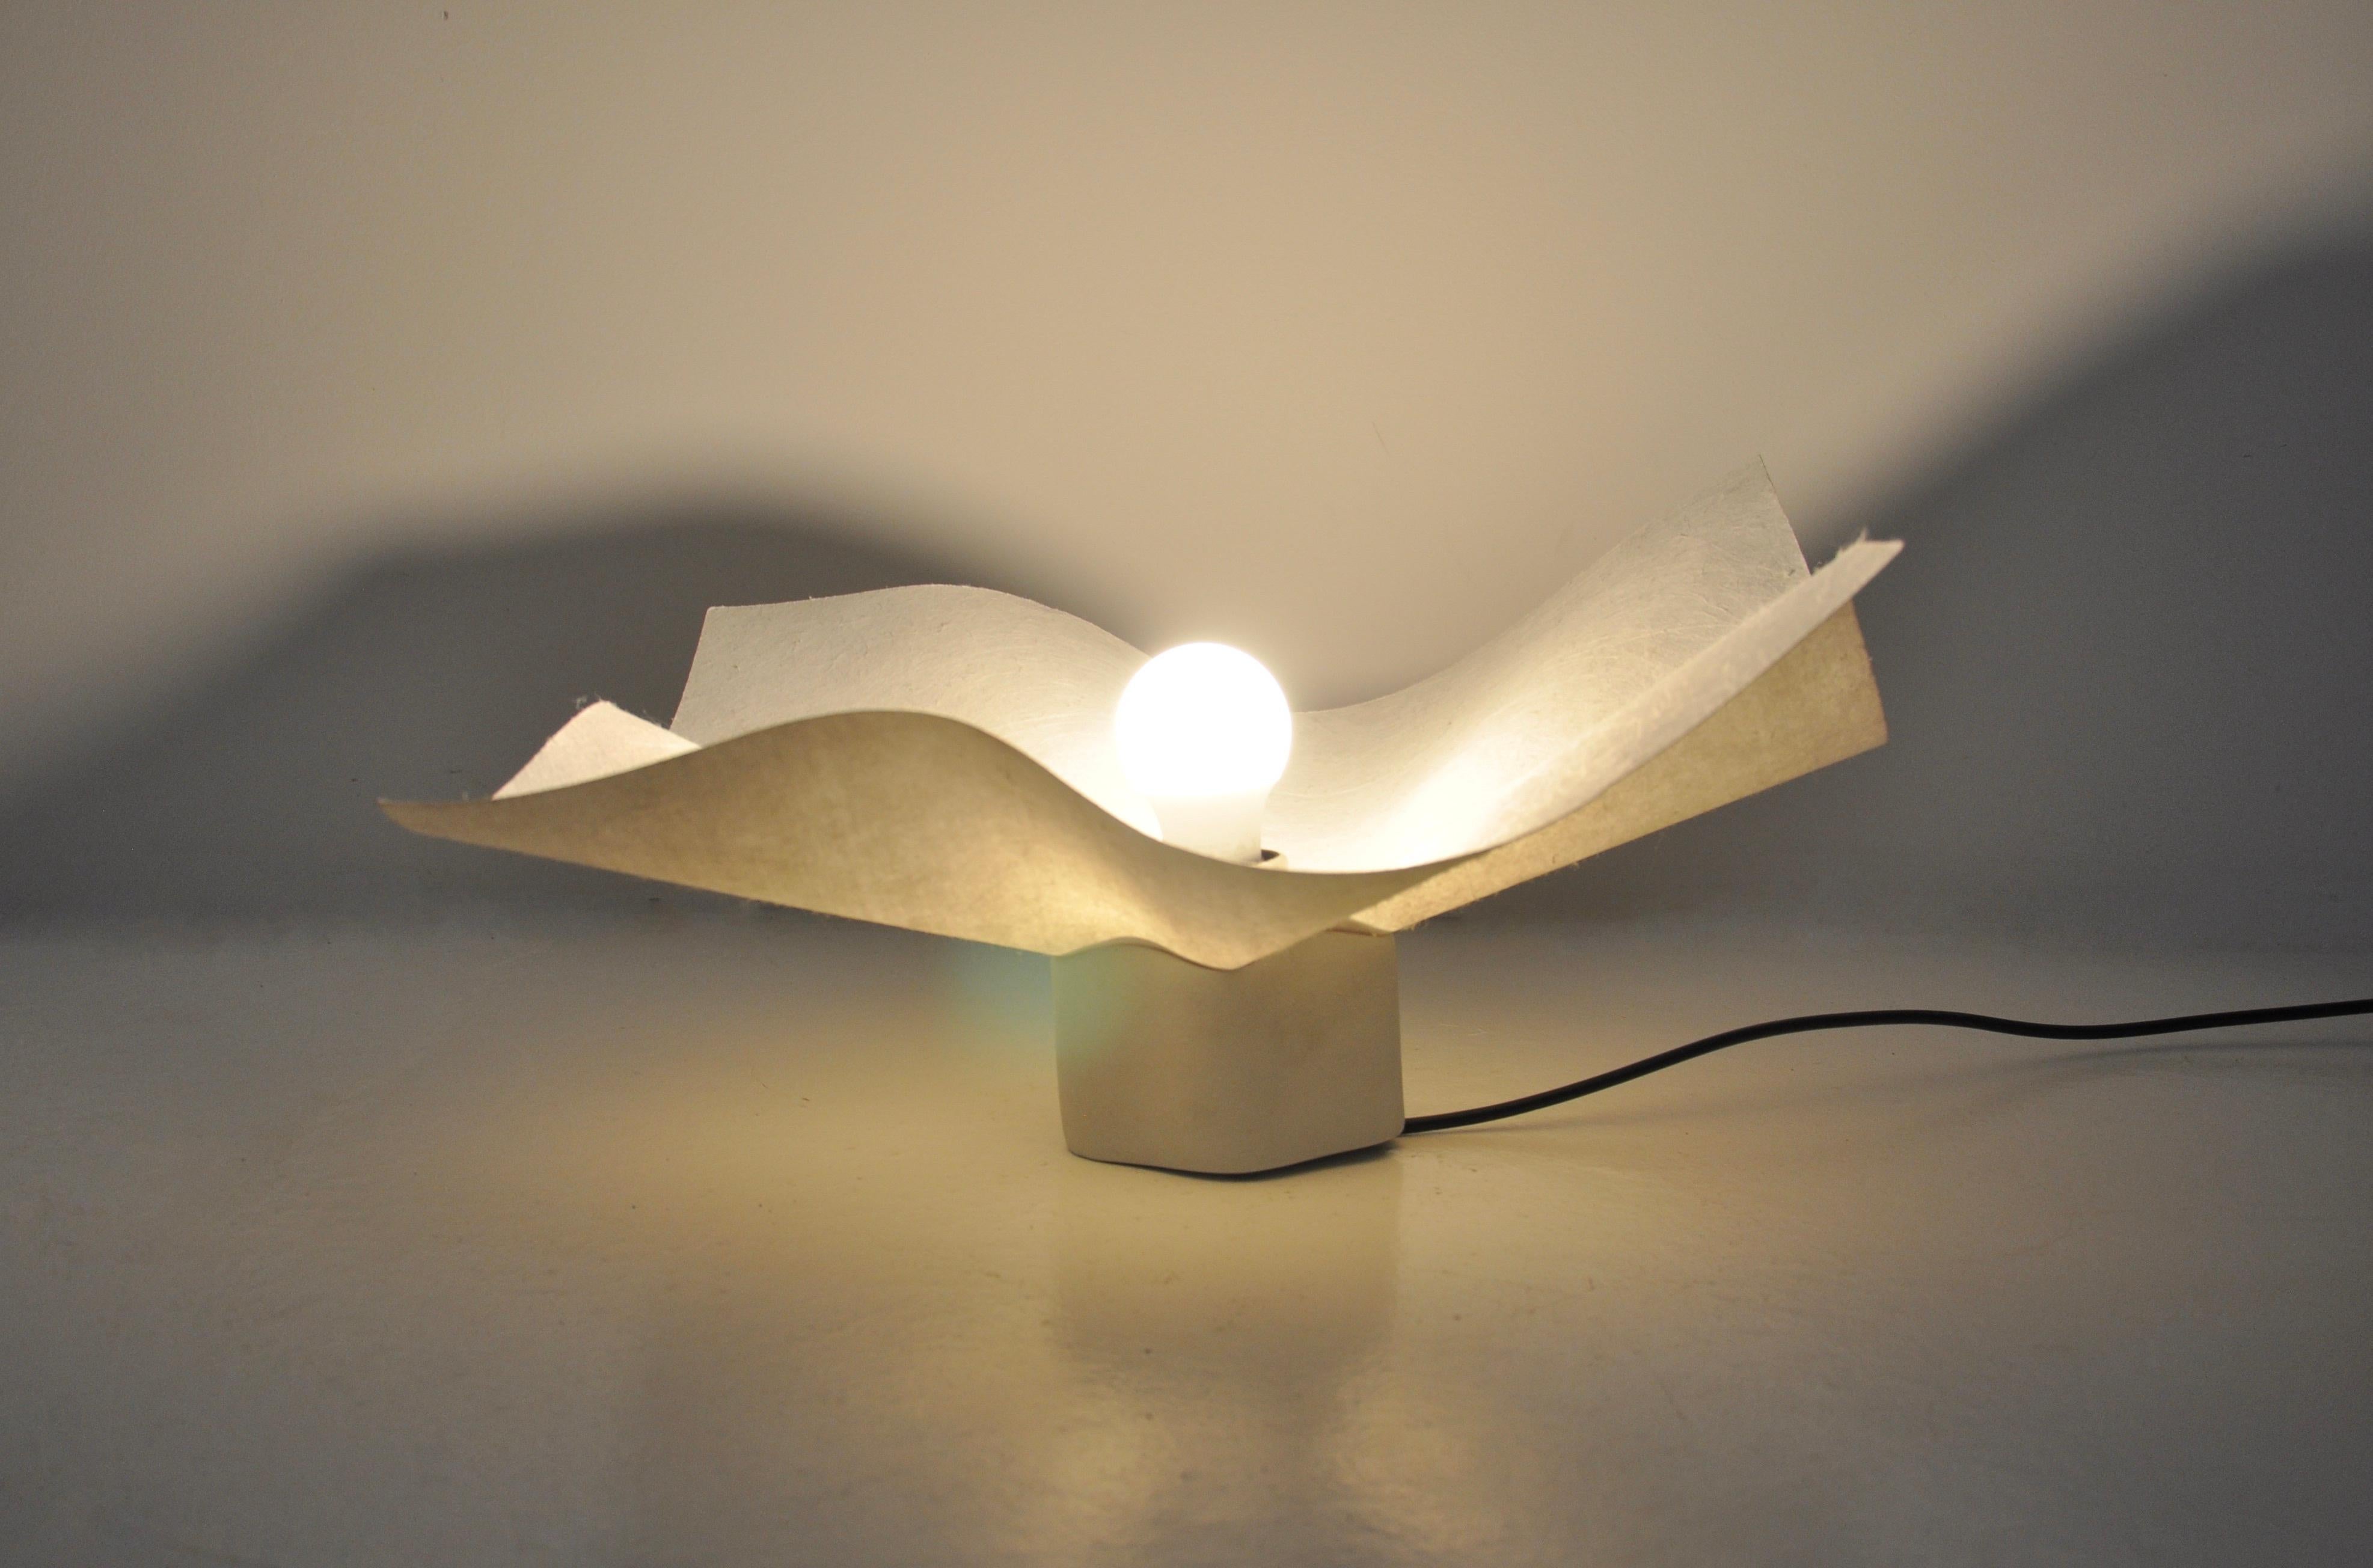 Area Table Lamp by Mario Bellini for Artemide, 1970s In Good Condition For Sale In Lasne, BE